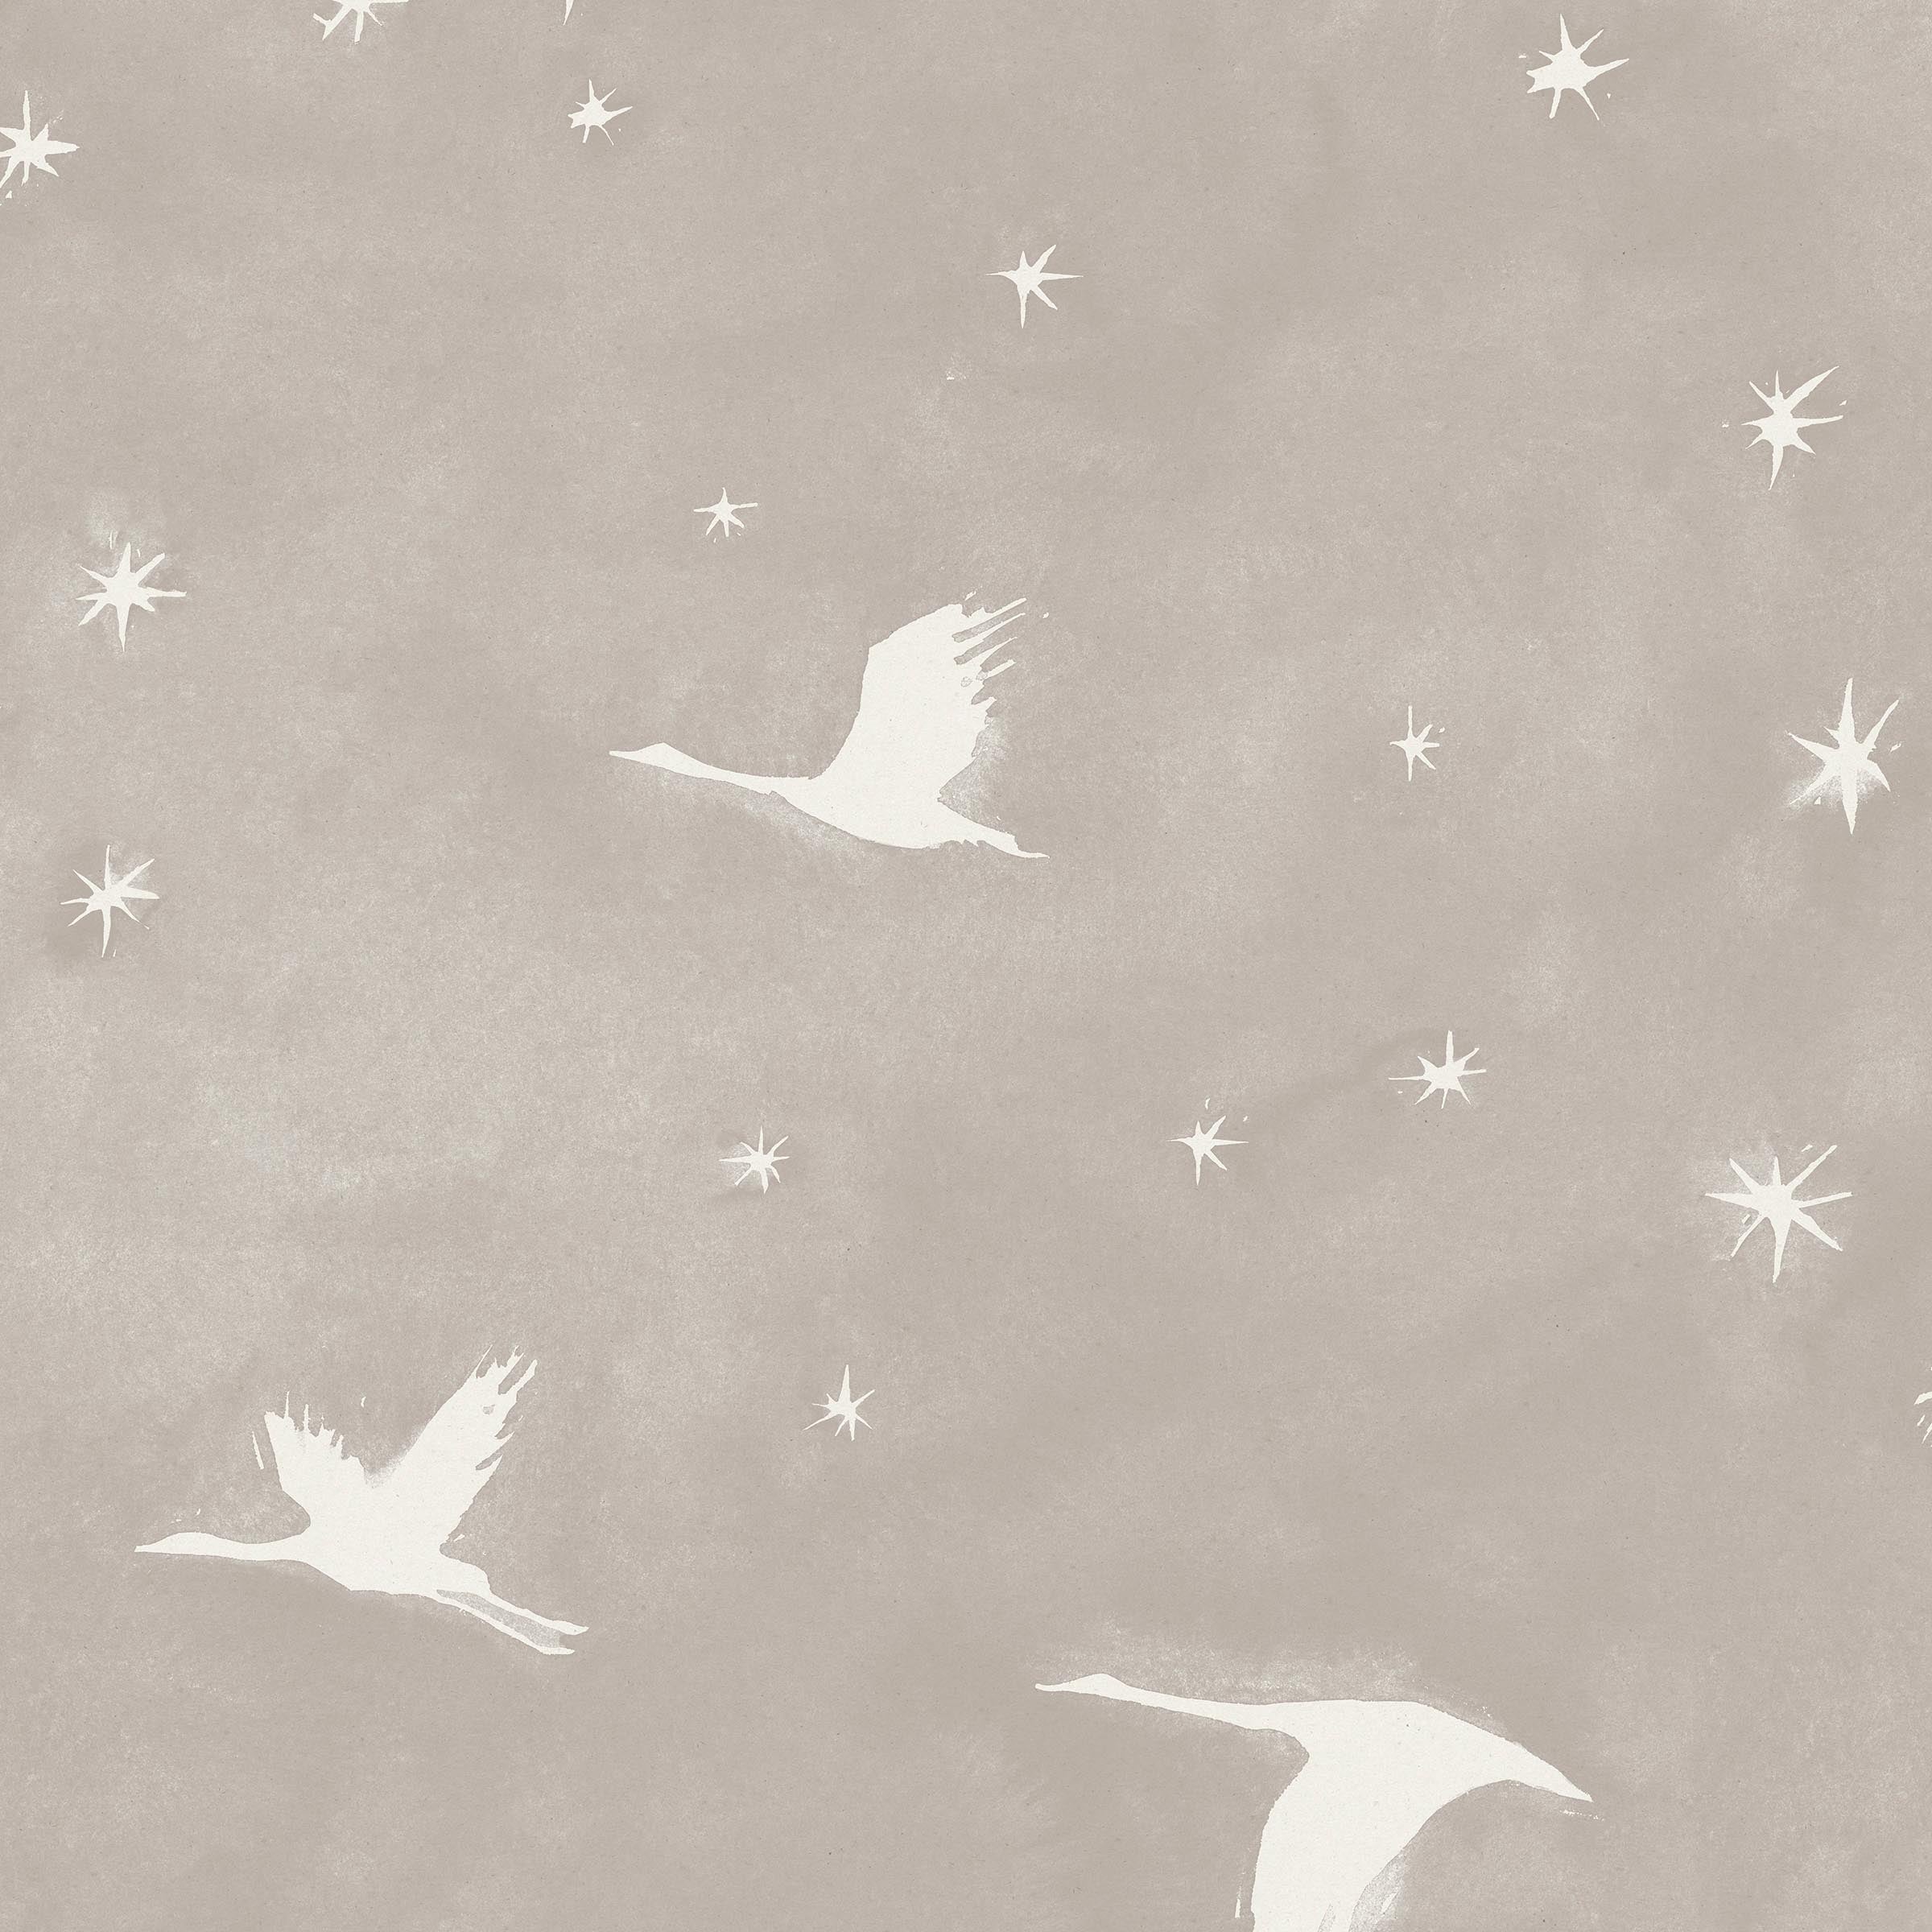 Detail of wallpaper in a repeating print of birds and stars in white on a light gray watercolor field.